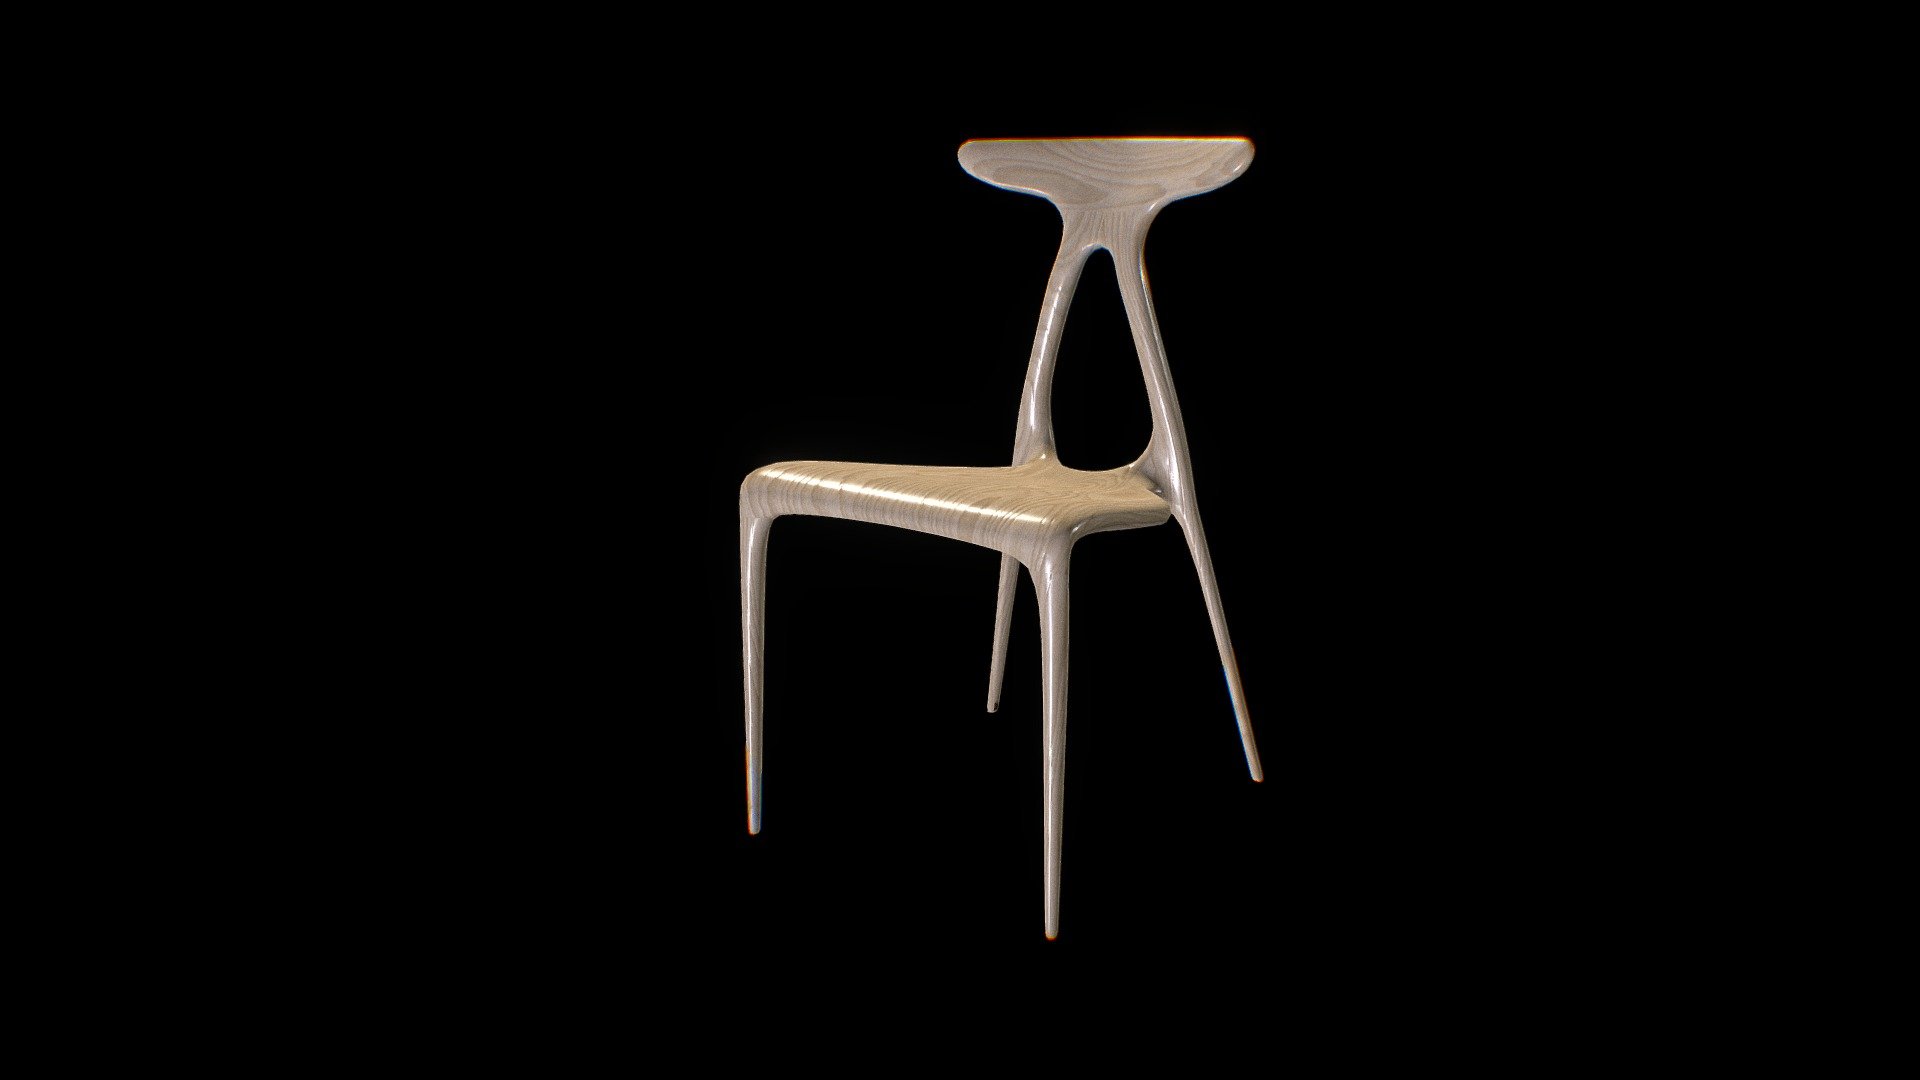 3d model of a dining chair for using in arch-viz.

This model was created in Maya and textured in Substance Painter.

This model is made in real proportions.

High quality of textures are available to download.

Metal-ness workflow- Base Color, Normal, Metal-ness, Ambient Occlusion and Roughness Textures - PNG 3d model